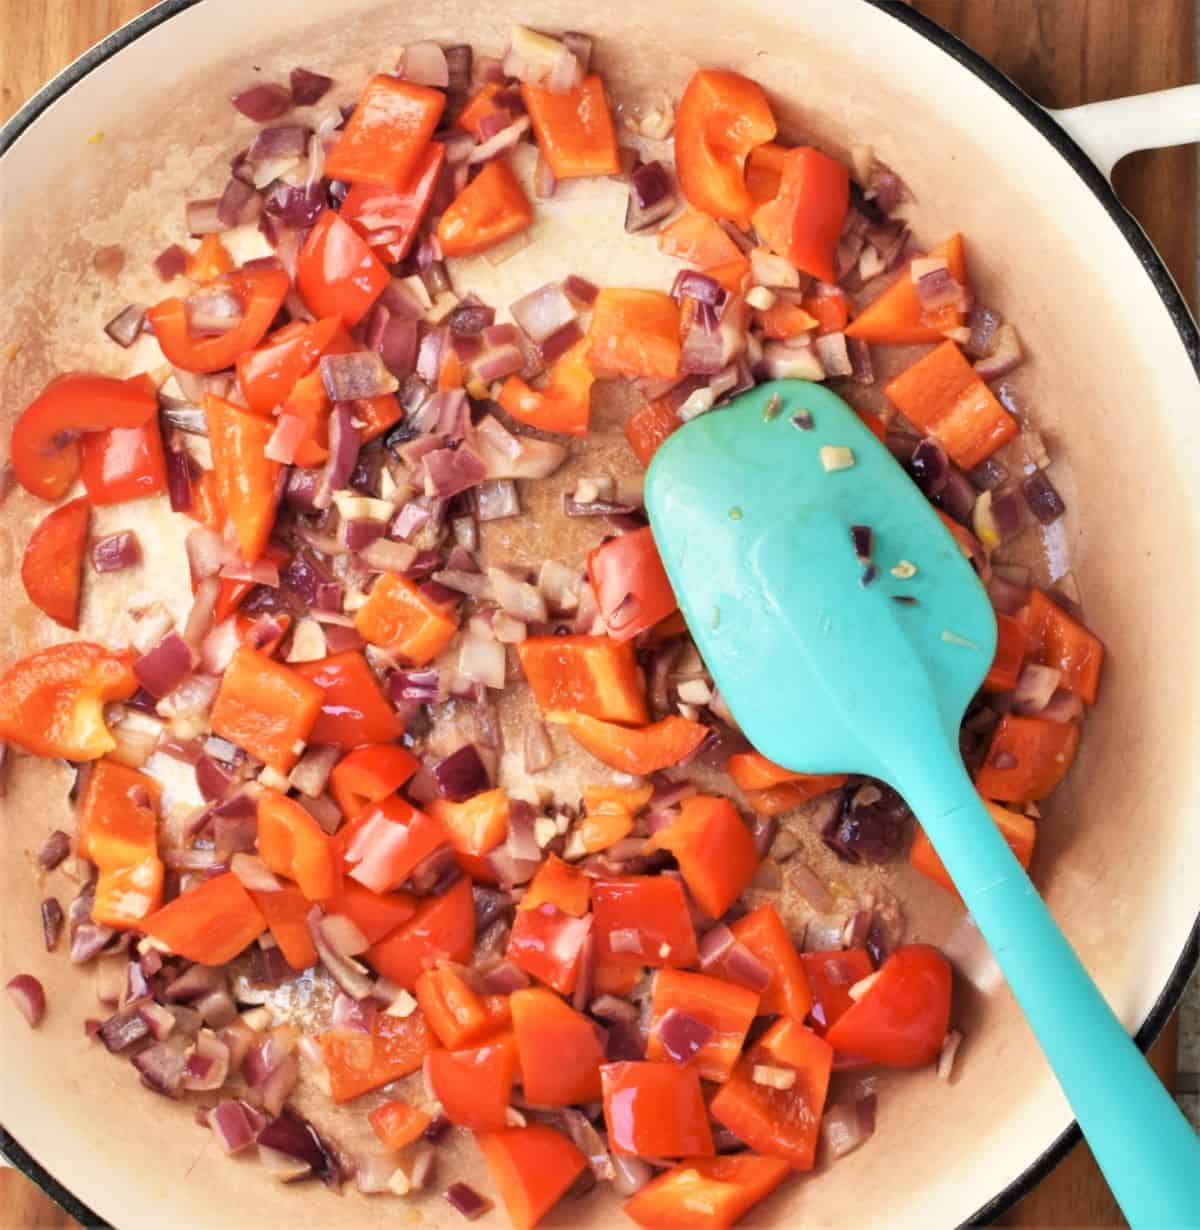 Chopped vegetables in large pan with blue spoon.